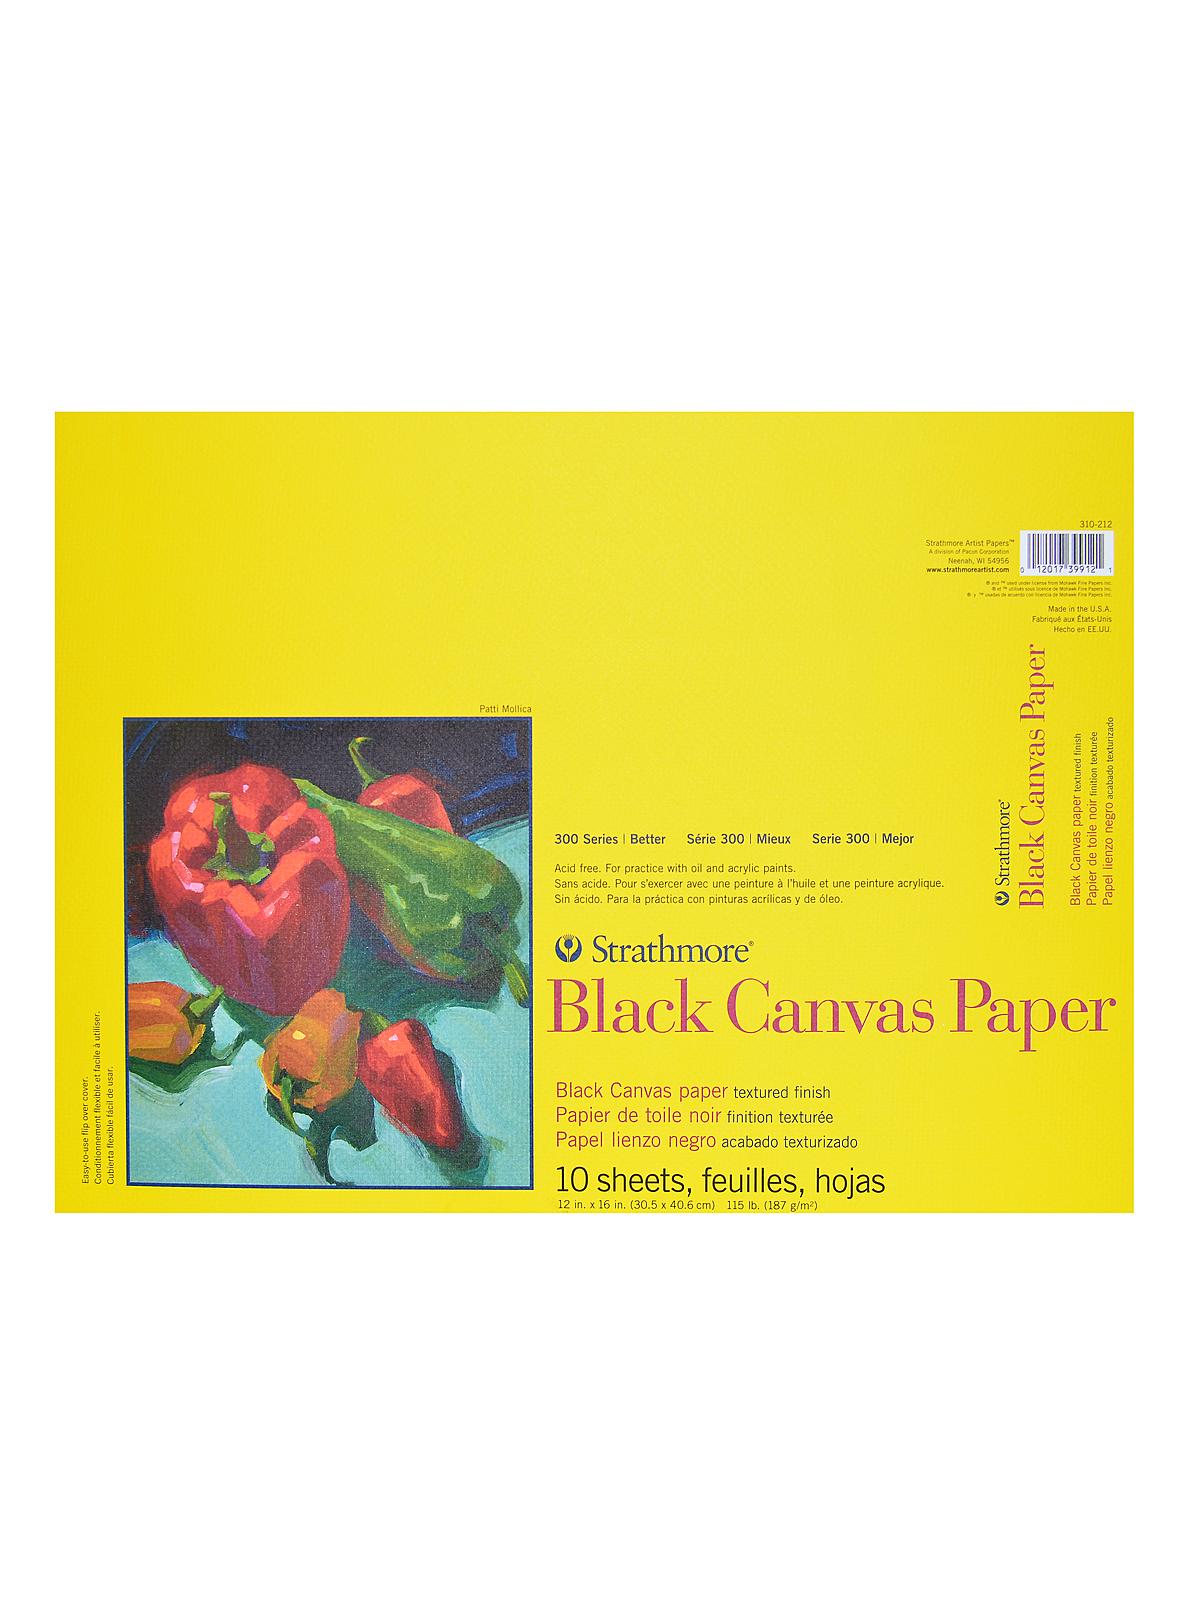 300 Series Black Canvas Paper 12 In. X 16 In. 10 Sheets